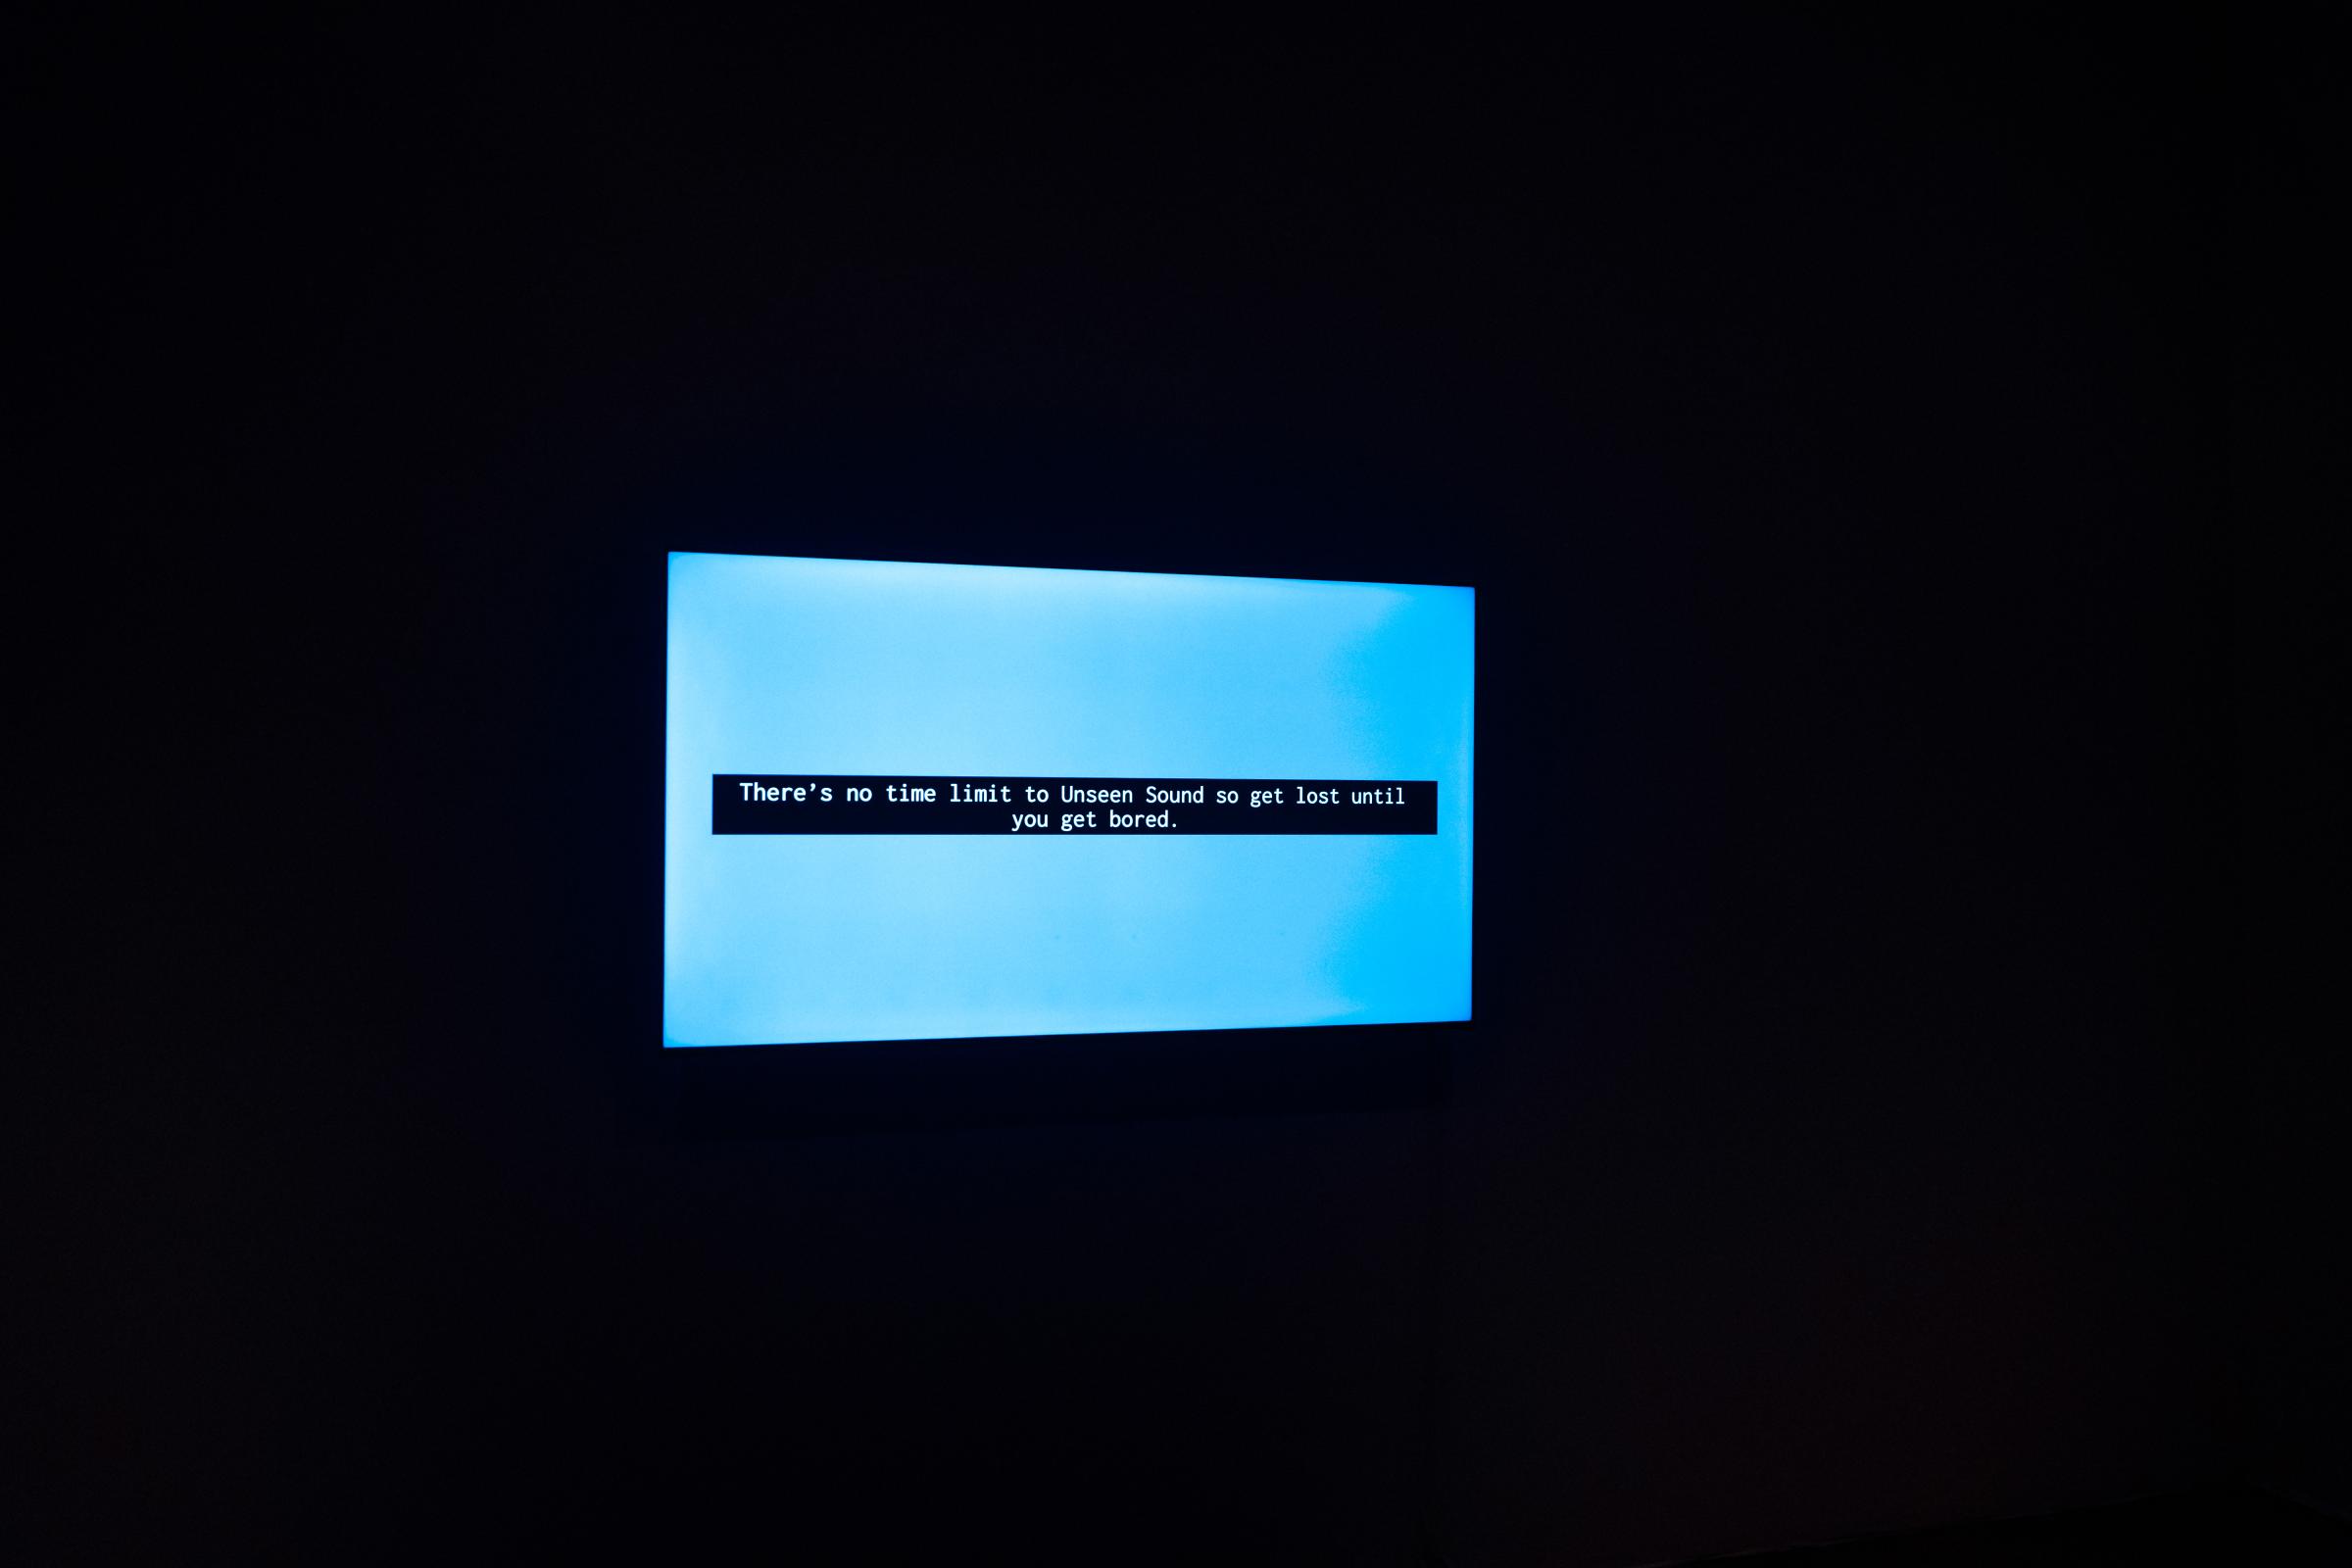 Monitor displaying a blue background with white text and black highlight around. Text reads "There's no time limit to Unseen Sounds so get lost until you get bored."